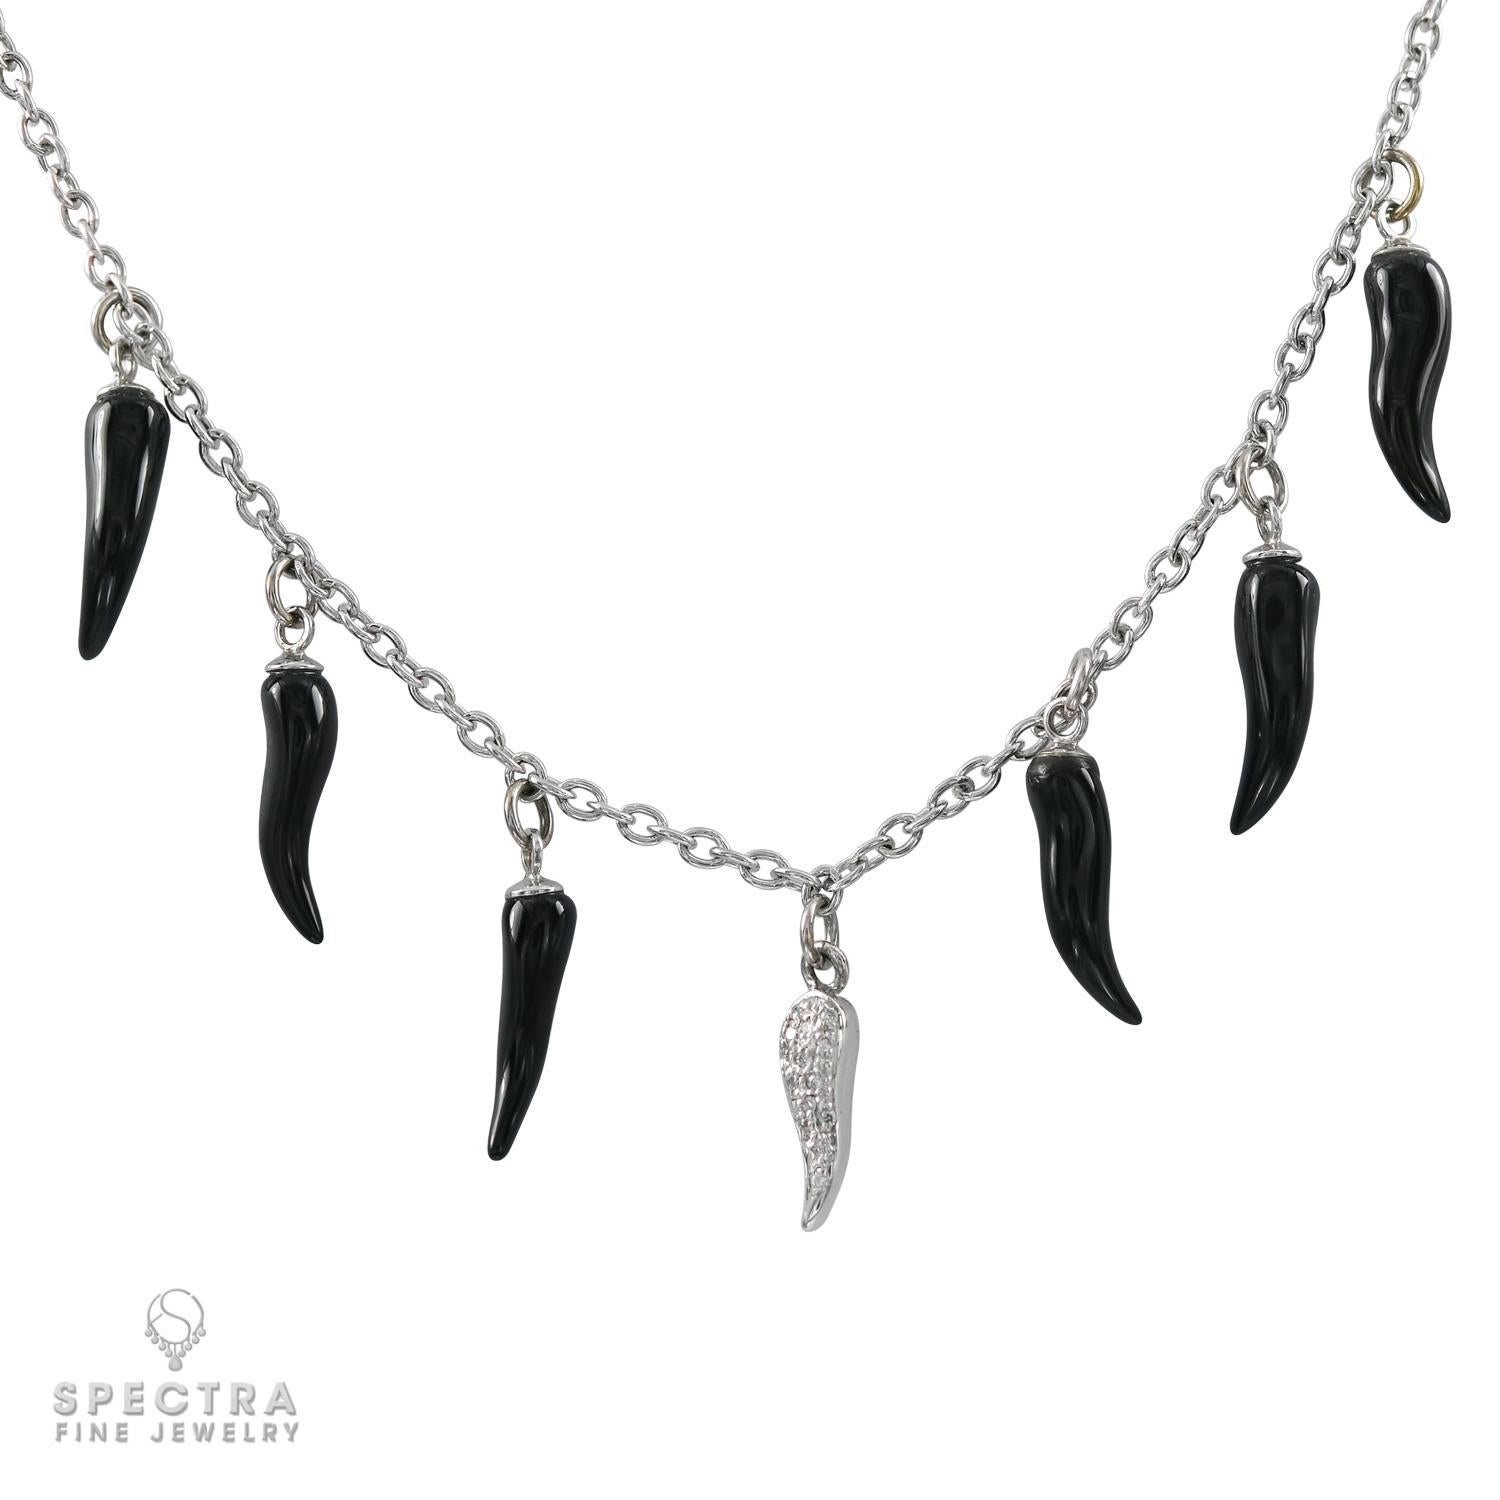 corno necklace meaning